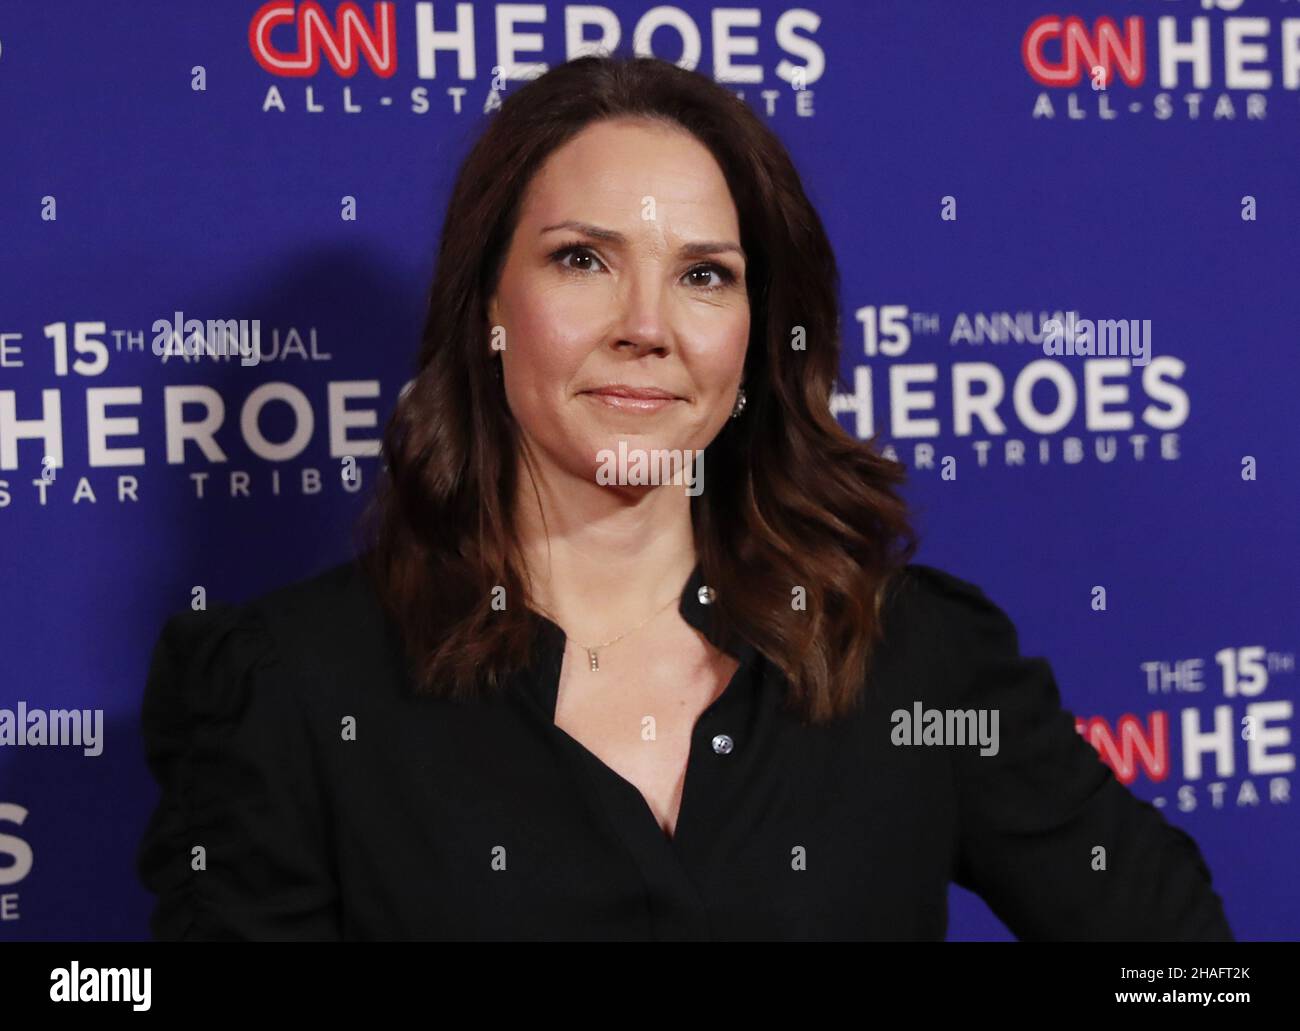 New York, United States. 12th Dec, 2021. Erica Hill arrives on the red carpet at the 15th Annual CNN Heroes: All-Star Tribute at the American Museum of Natural History on Sunday, December 12, 2021 in New York City. Photo by John Angelillo/UPI Credit: UPI/Alamy Live News Stock Photo